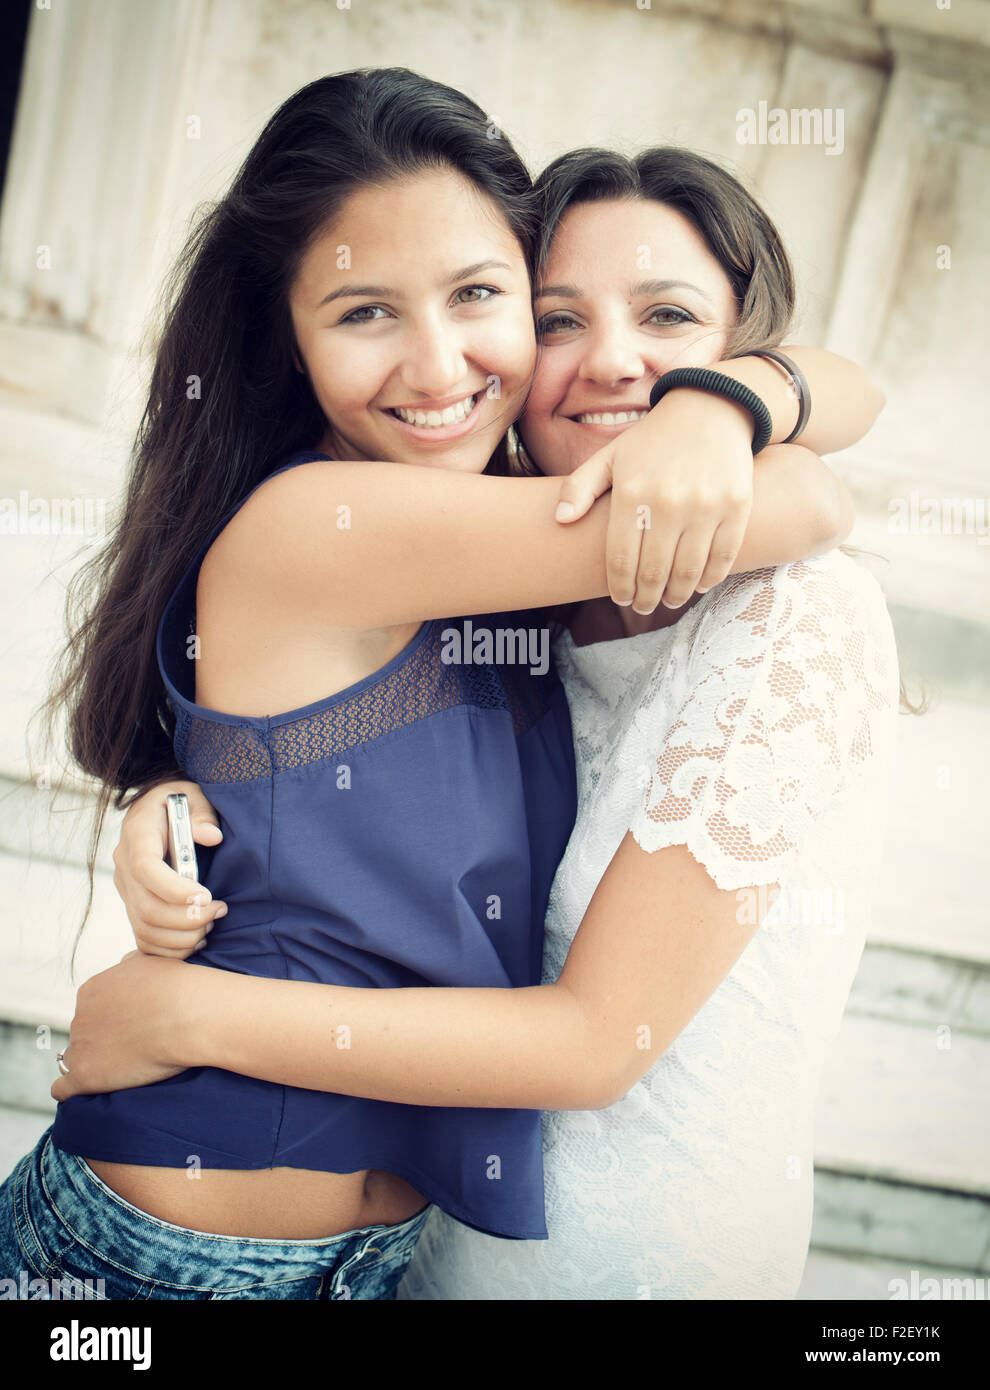 Two sisters embracing and smiling looking into camera Stock Photo